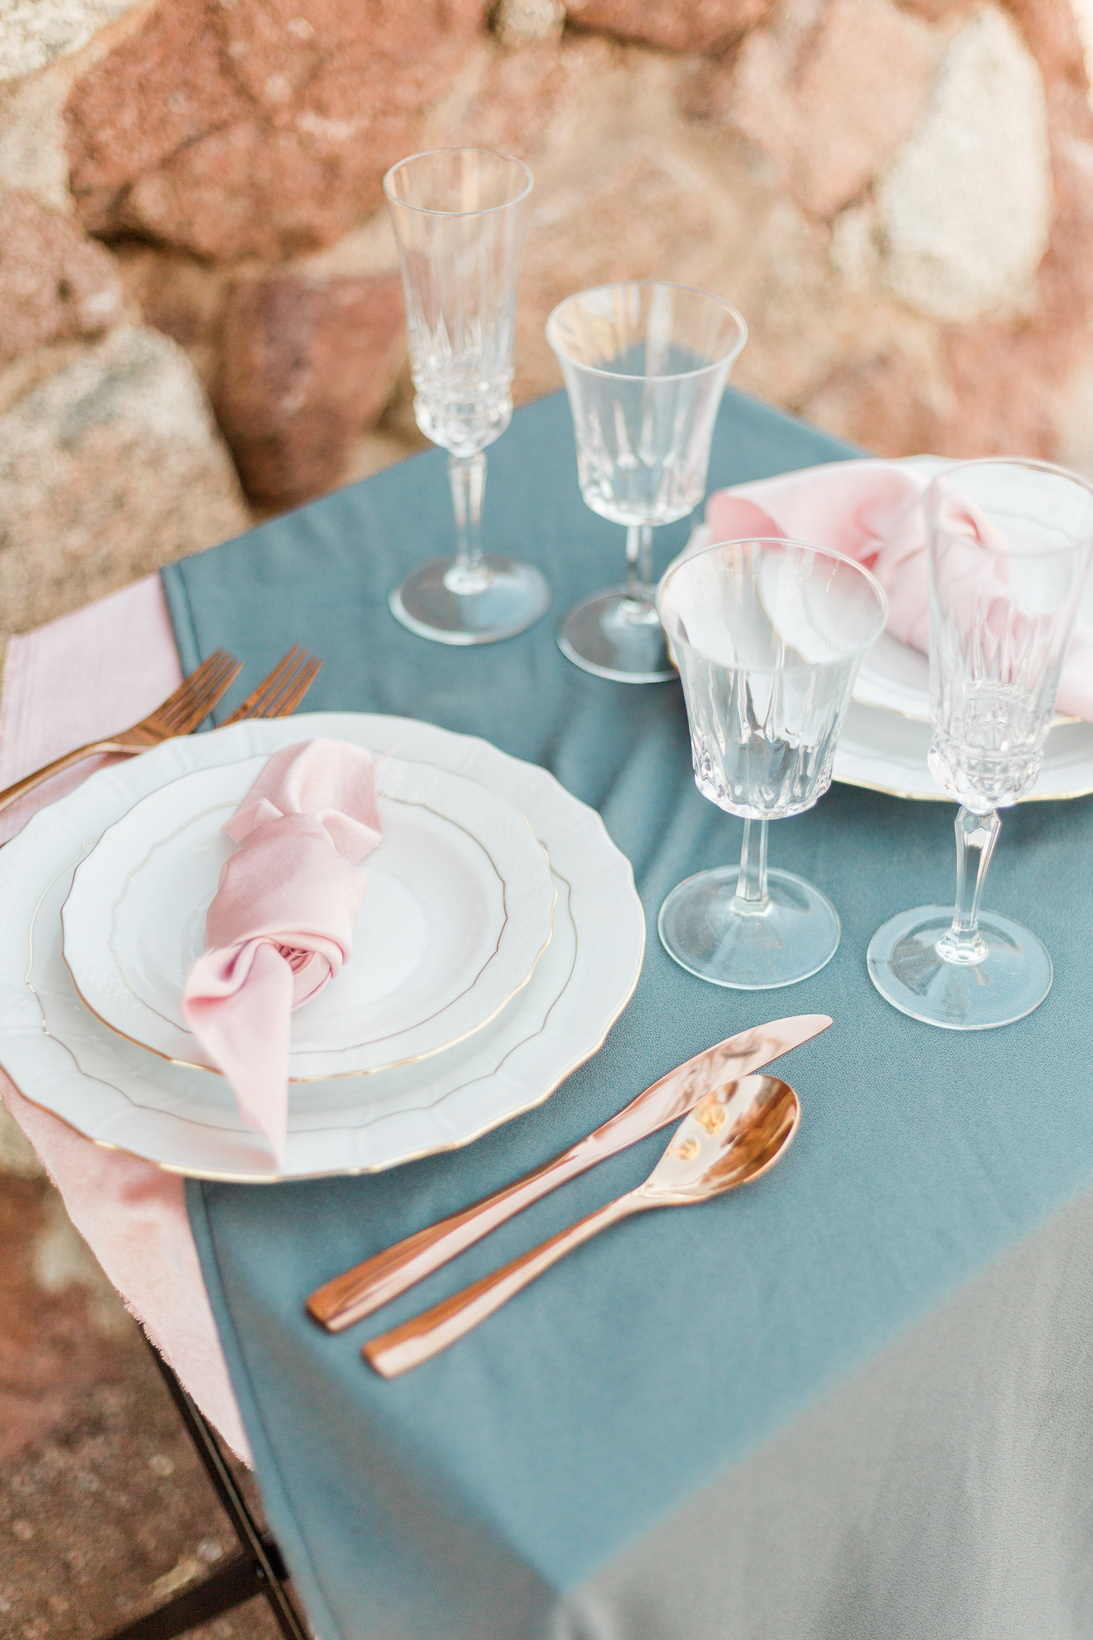 Rustic Table Setting with Dishware, Utensils and Glasses Outdoors